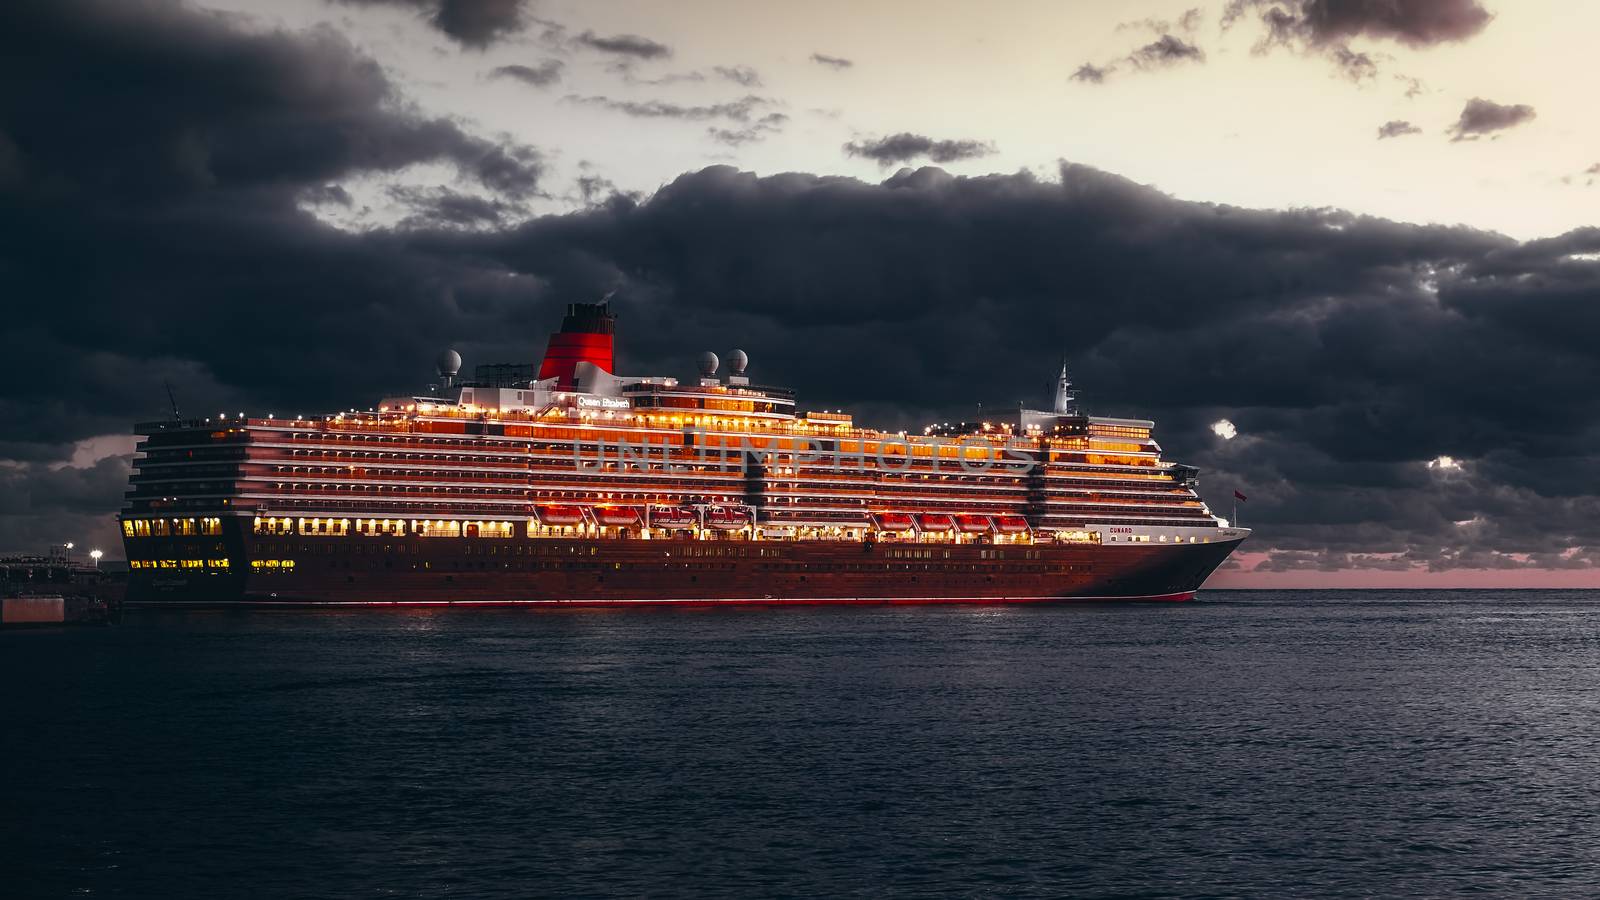 MS Queen Elizabeth  cruise ship docked at the port of Malaga cit by Roberto